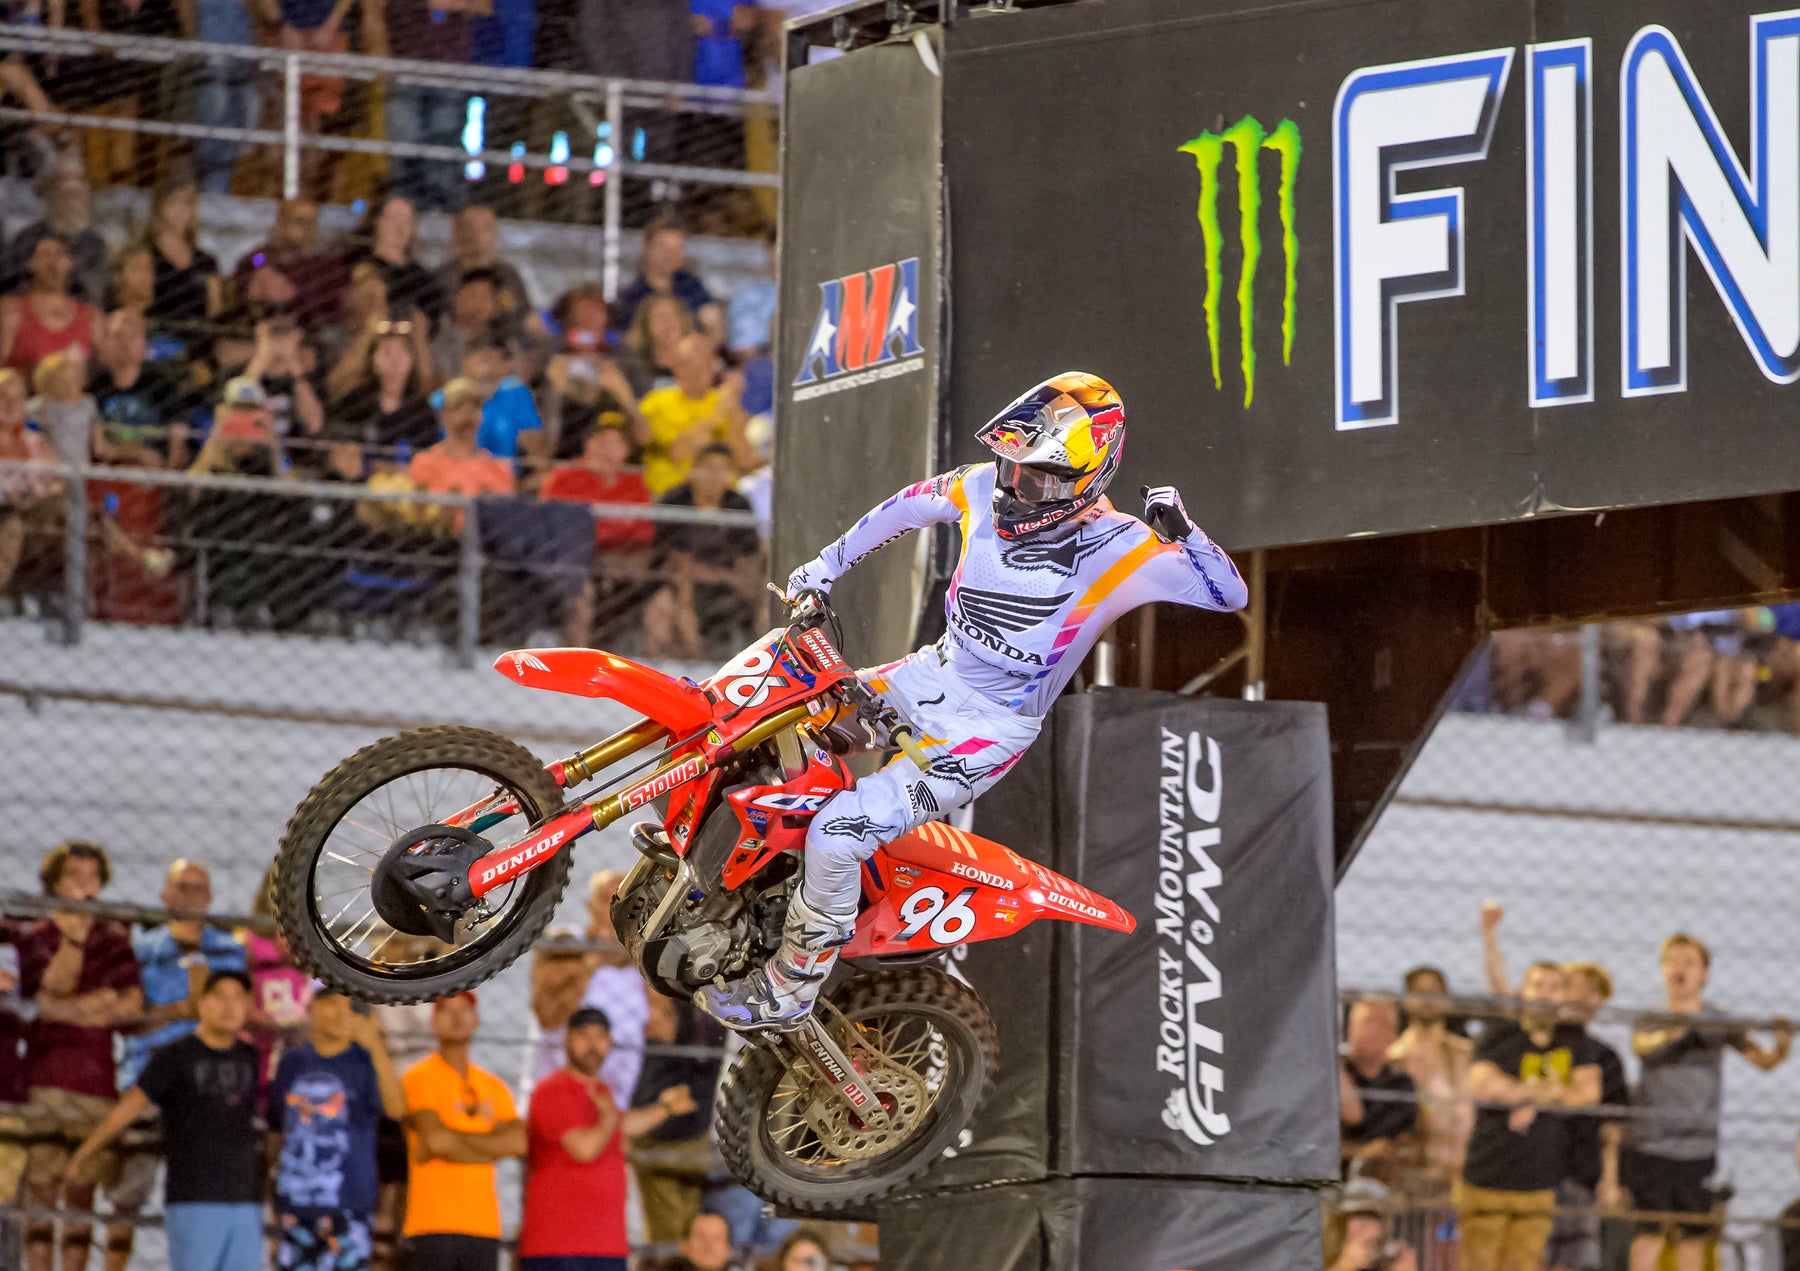 ALPINESTARS PODIUM LOCK-OUT AS HUNTER LAWRENCE POWERS TO DOMINATING 250SX EAST TRIUMPH AT DAYTONA